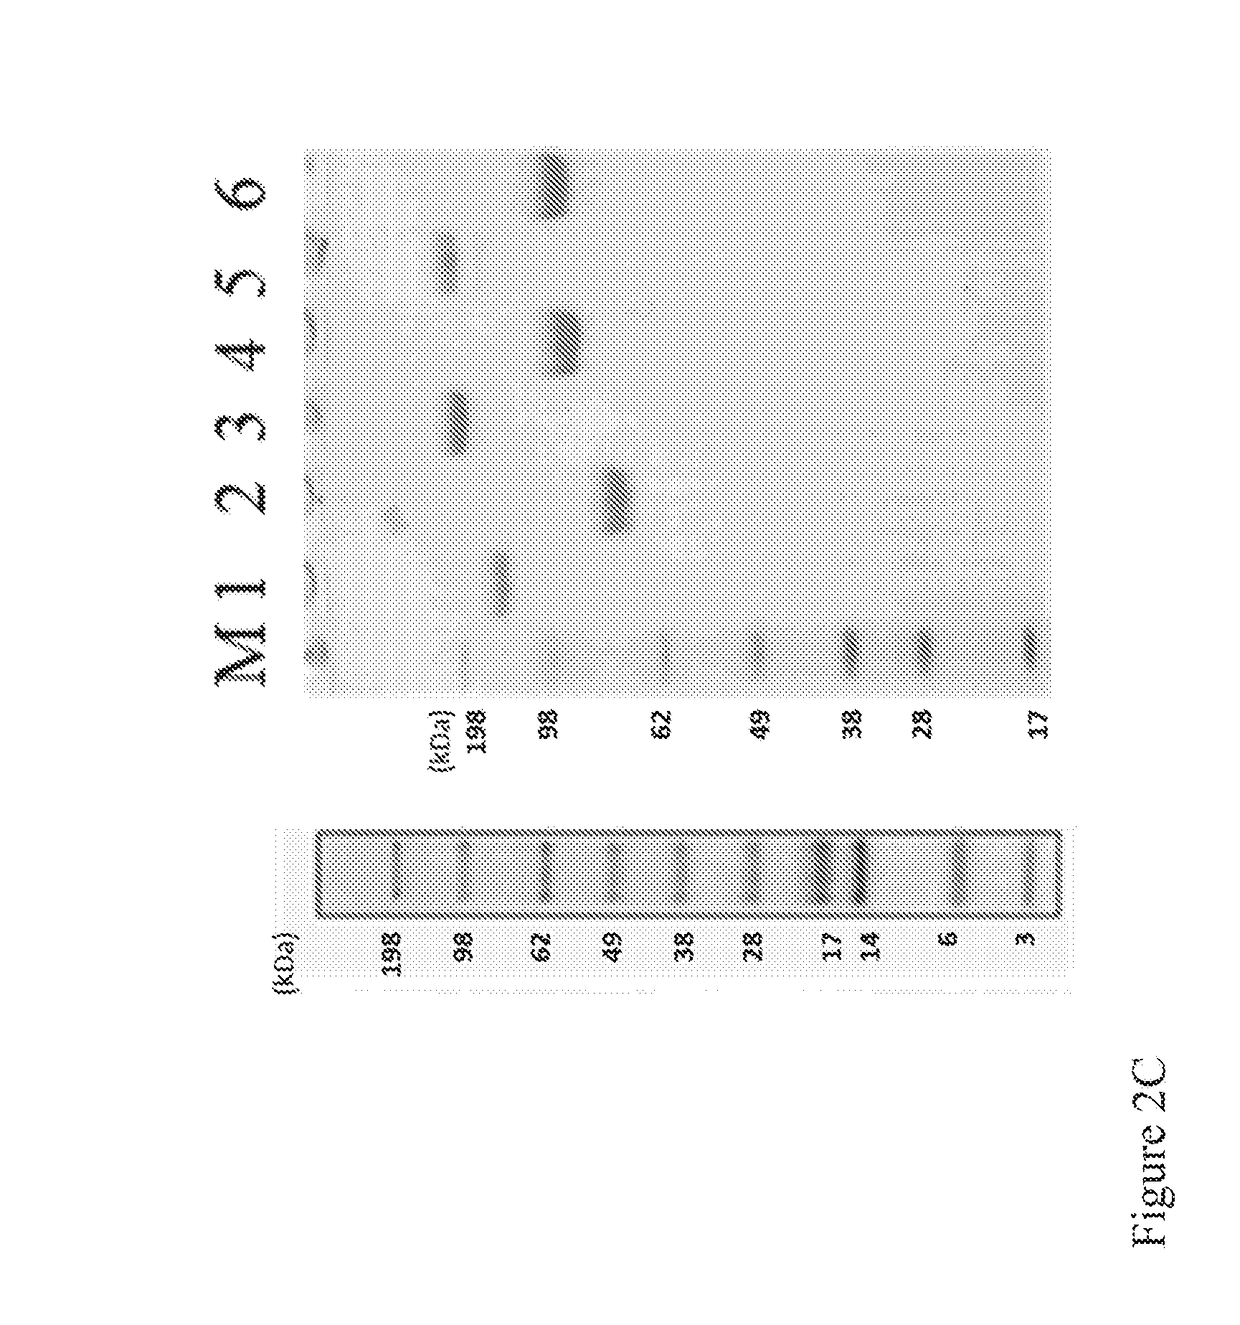 Fusion protein comprising a ligand binding domain of VEGF and pdgf